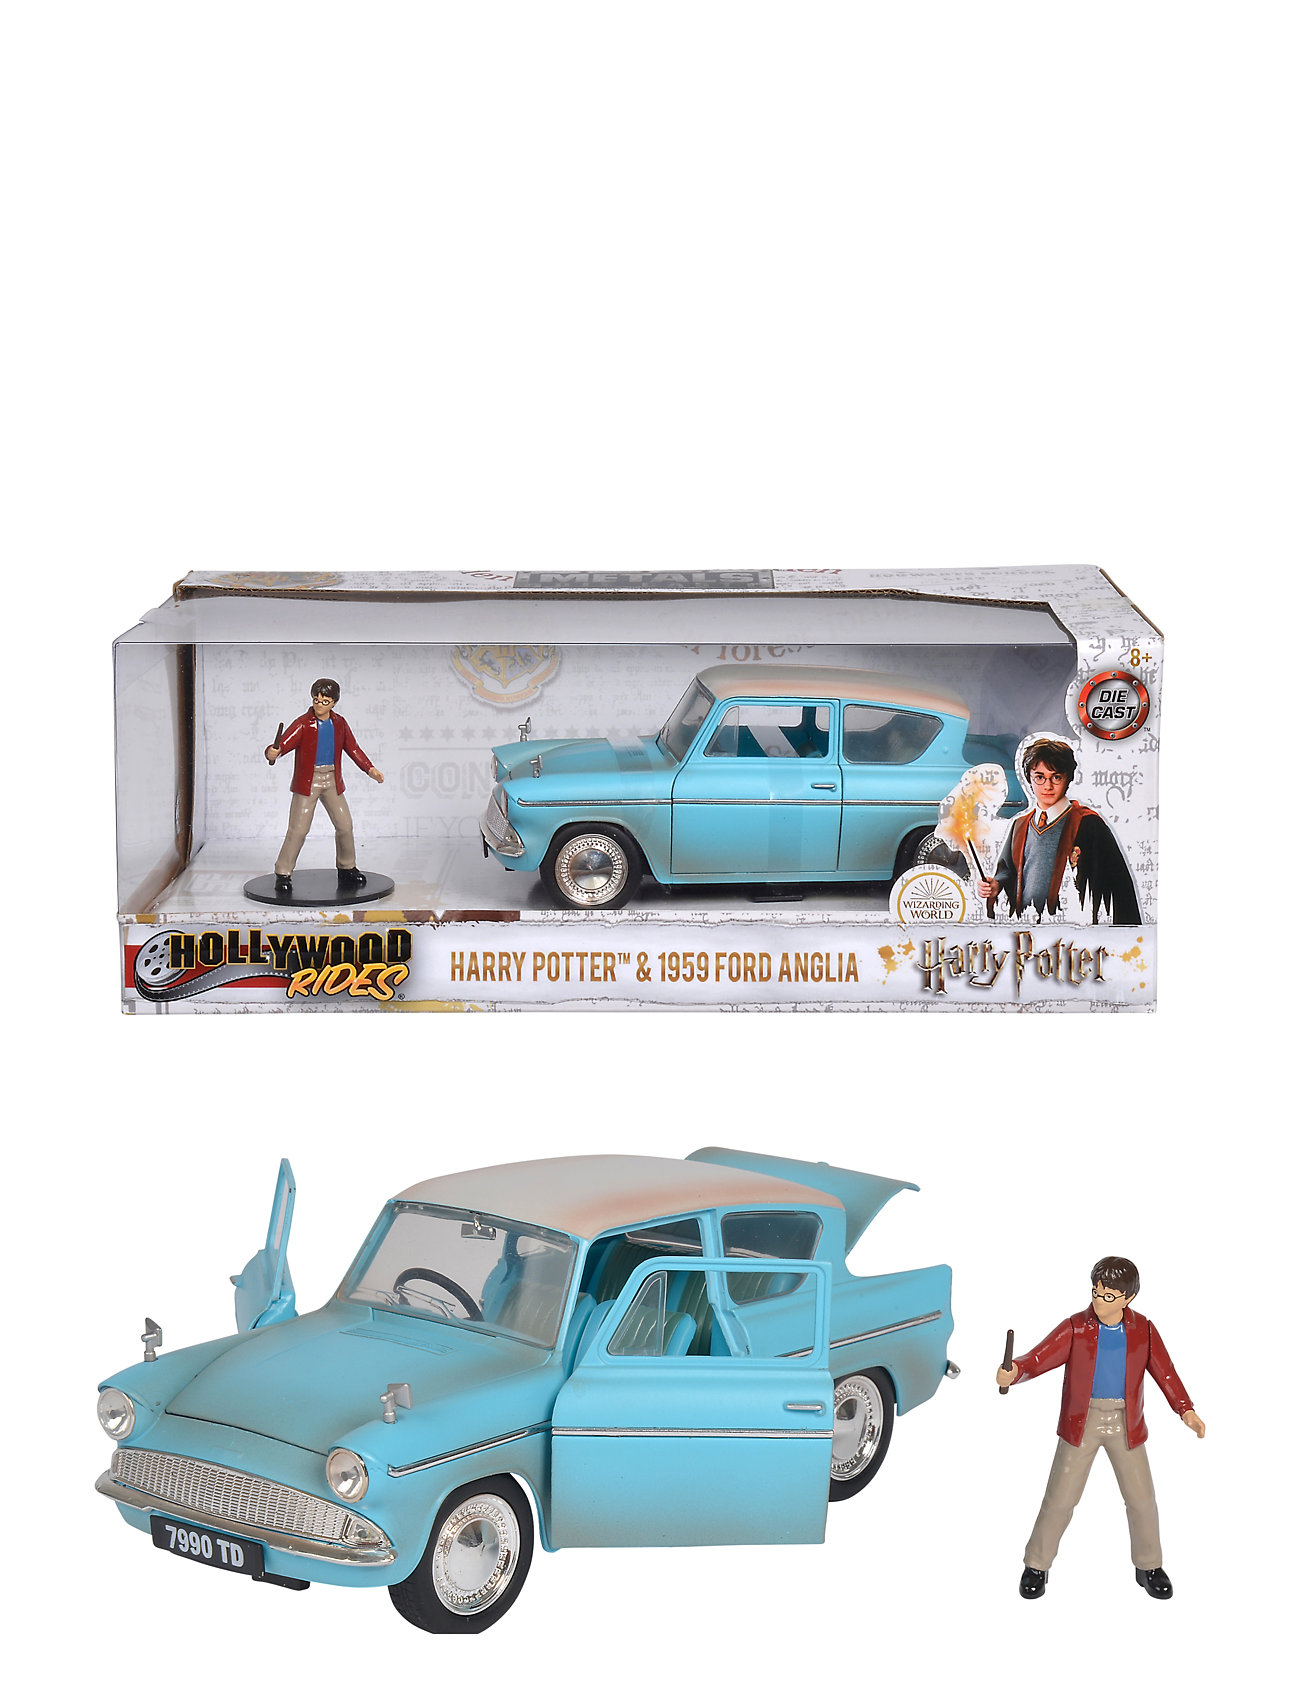 Harry Potter 1959 Ford Anglia 1:24 Toys Toy Cars & Vehicles Toy Cars Blue Jada Toys